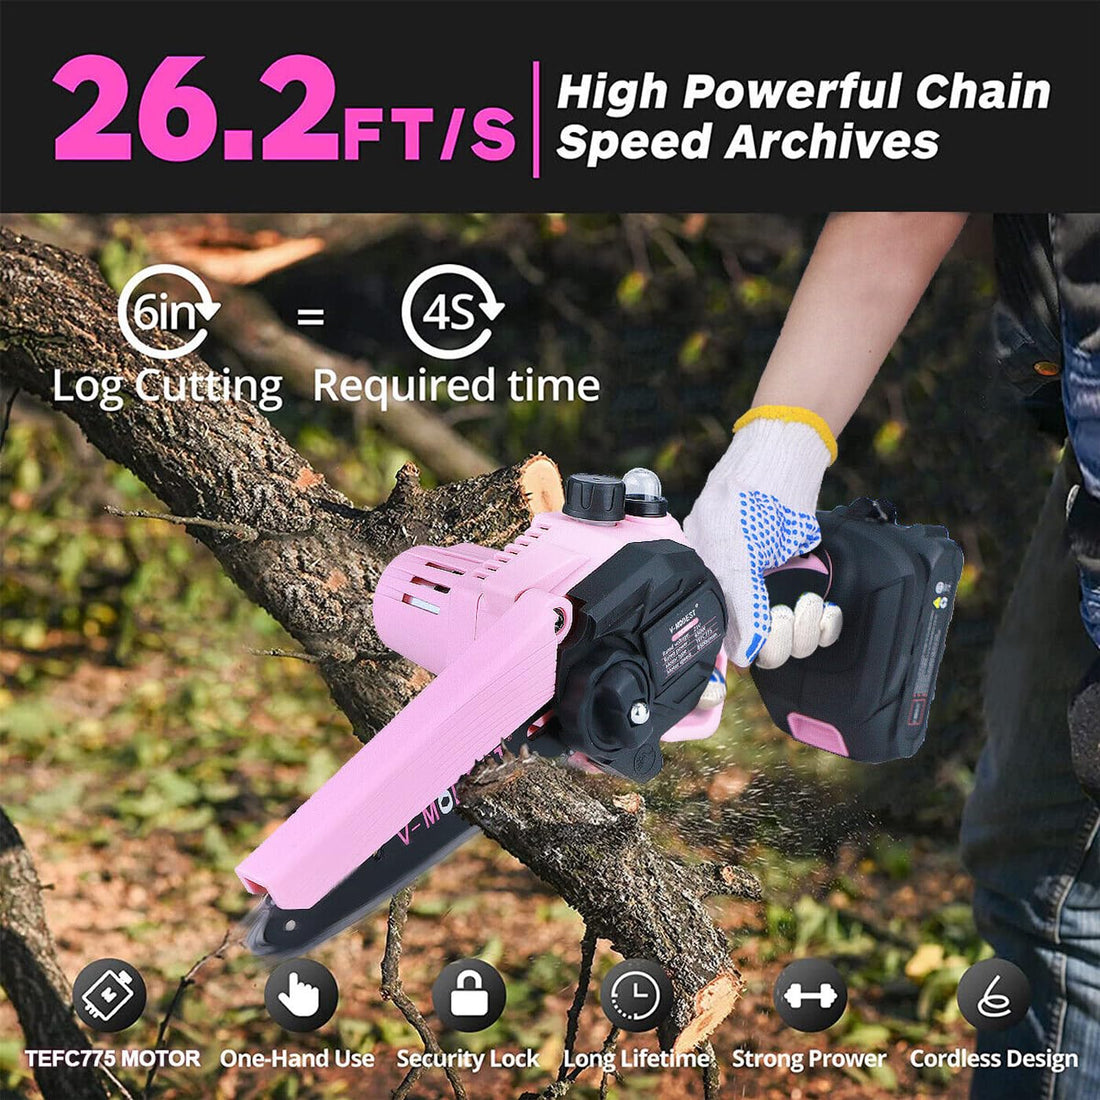 Mini Chainsaw Cordless with Auto-Oiler,V-MODEST 6 Inch Handheld Electric Chain Saw with 2 Batteries,Left/Right Security Lock Small Chainsaw for Wood Cutting,Branch Pruning(21V/2000mAh/650W)